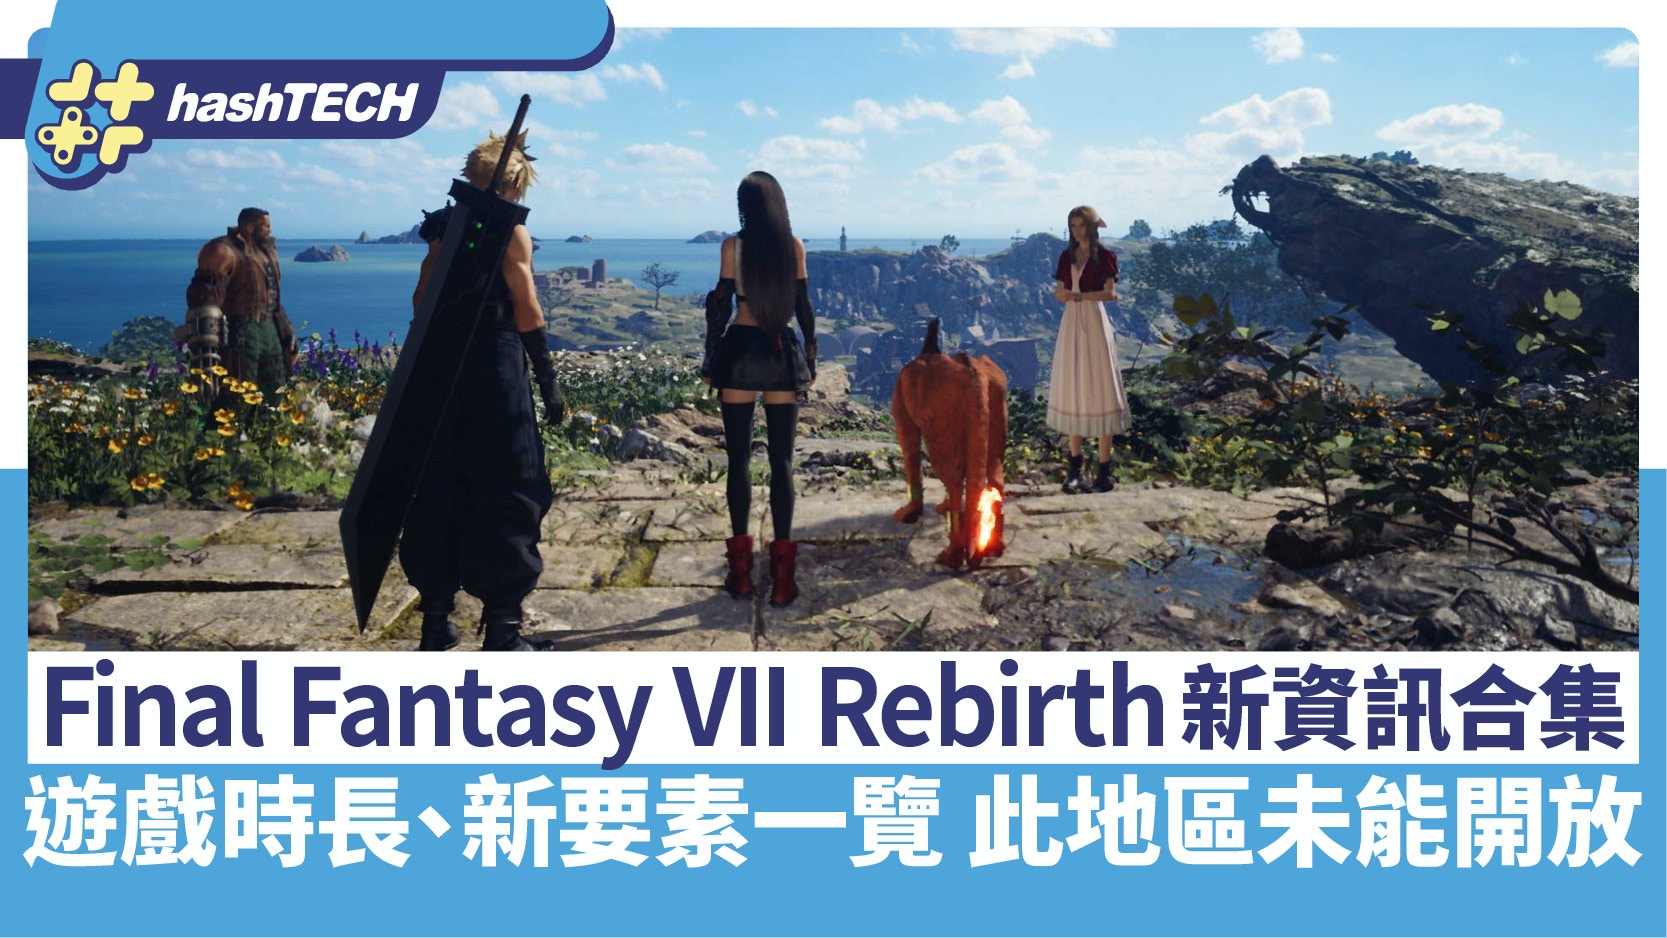 Final Fantasy VII Rebirth: An Extensive and Exciting 100-Hour Gameplay Experience Revealed at TGS